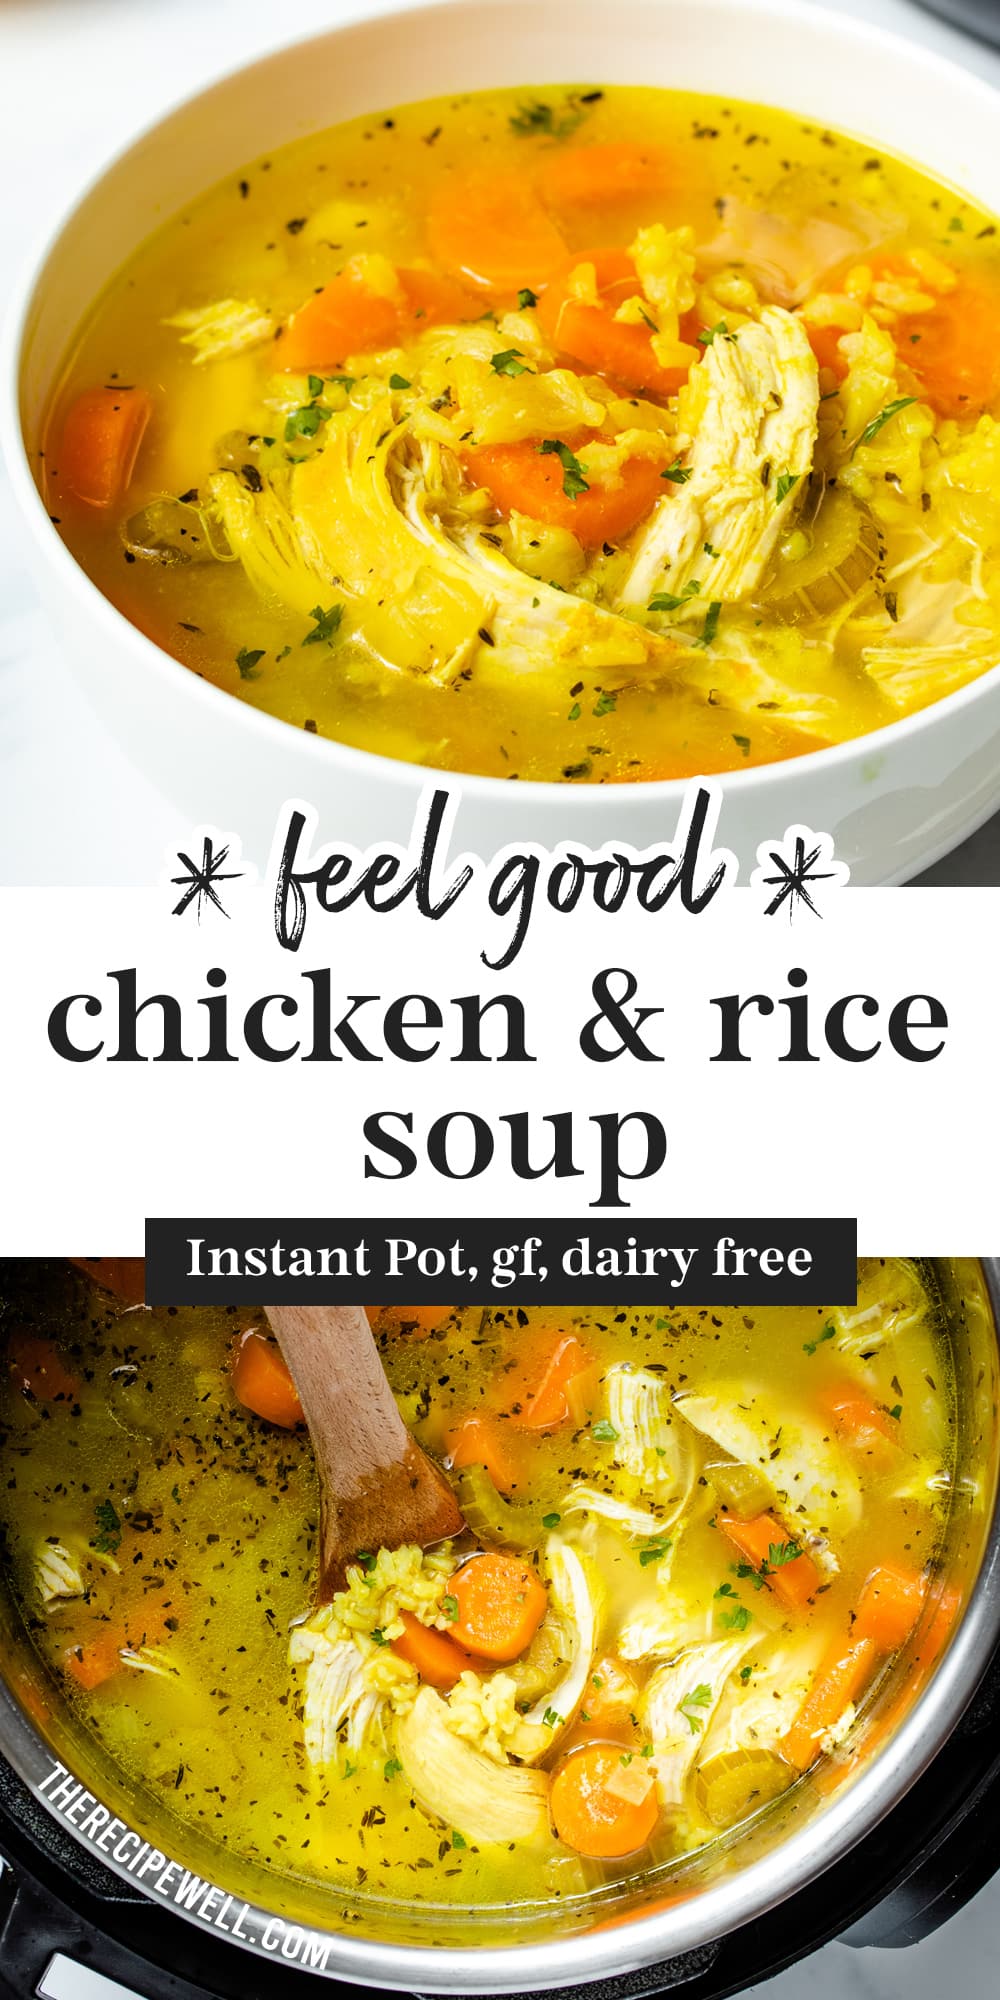 This simple Instant Pot Chicken and Rice soup is a staple recipe. With warming spices and a hint of lemon, you can't help but feel good after eating it! via @therecipewell